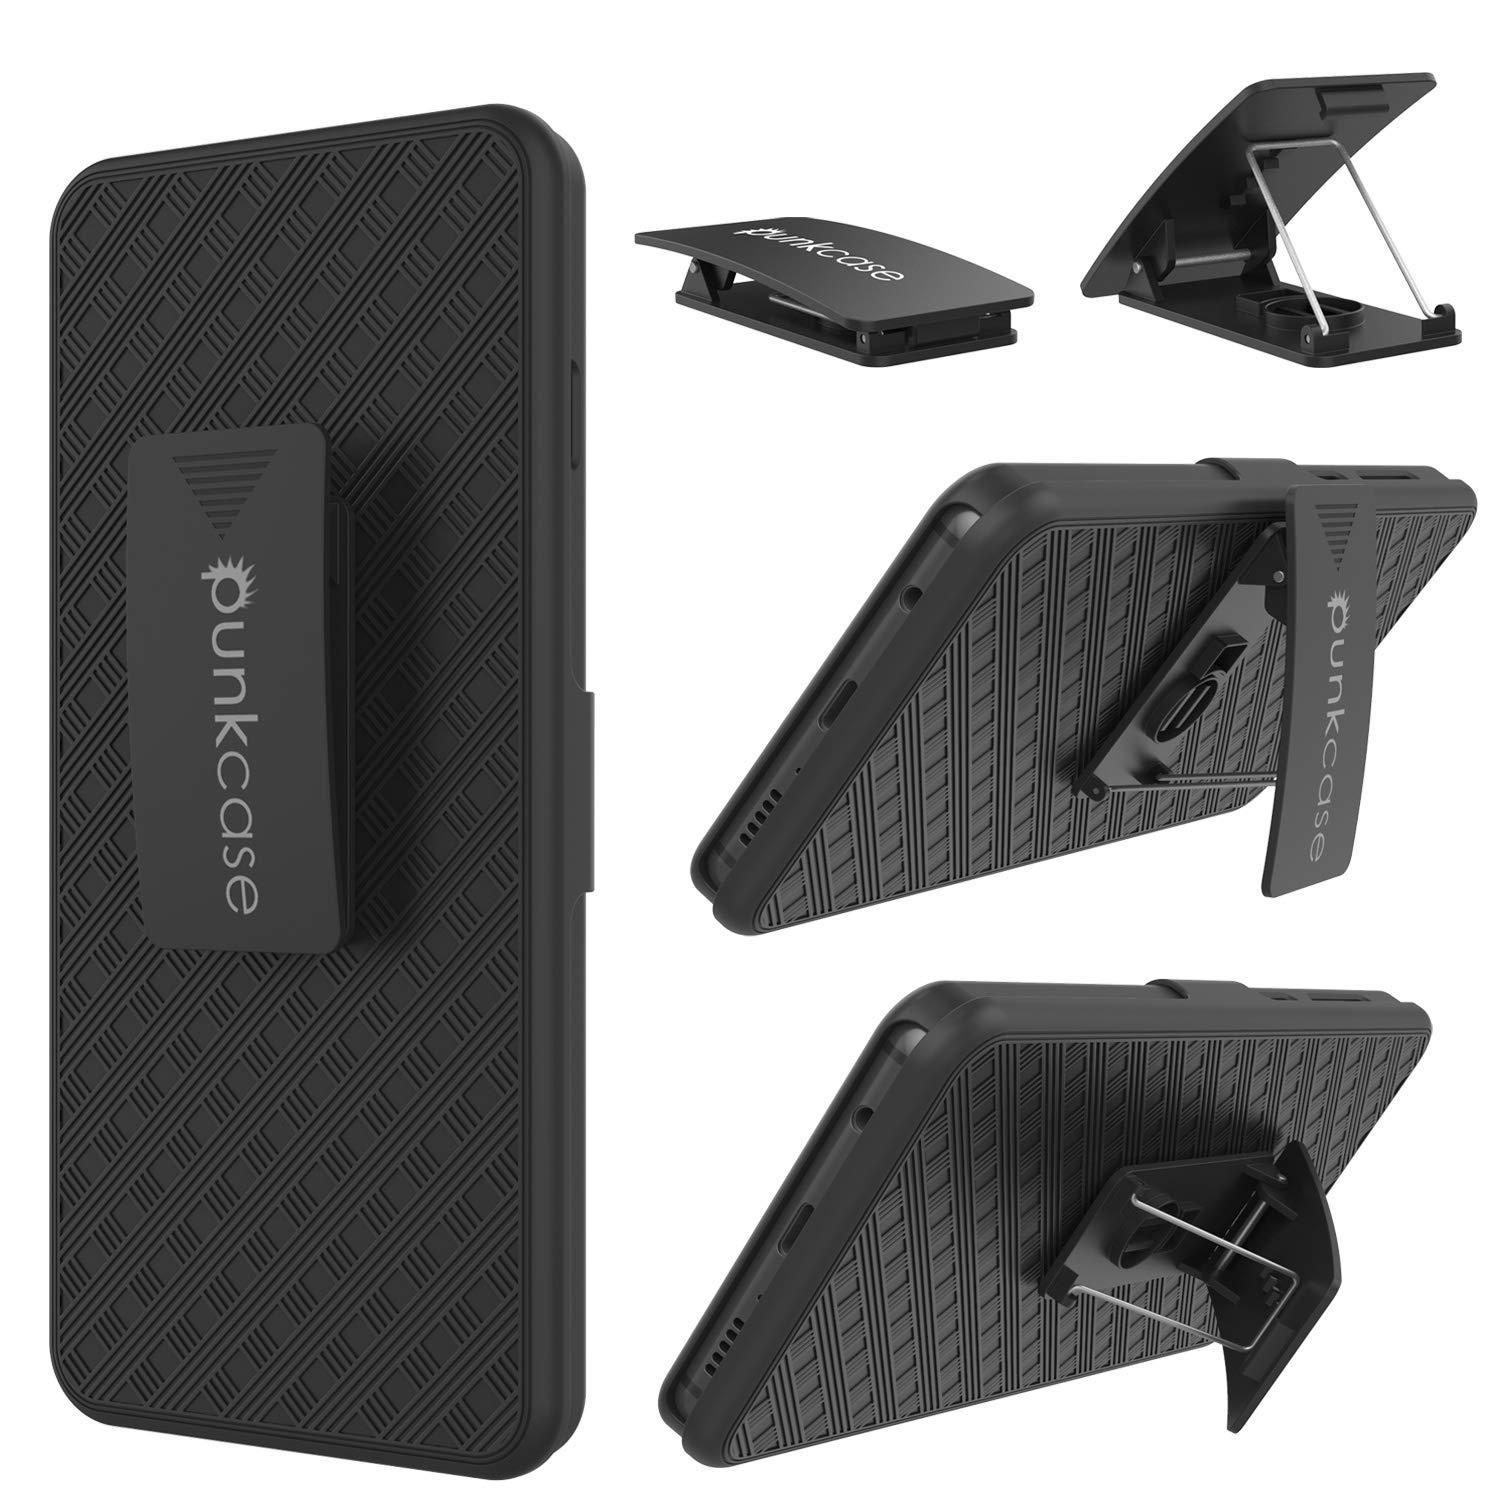 Punkcase Galaxy S10 5G Case With Screen Protector, Holster Belt Clip [Black]